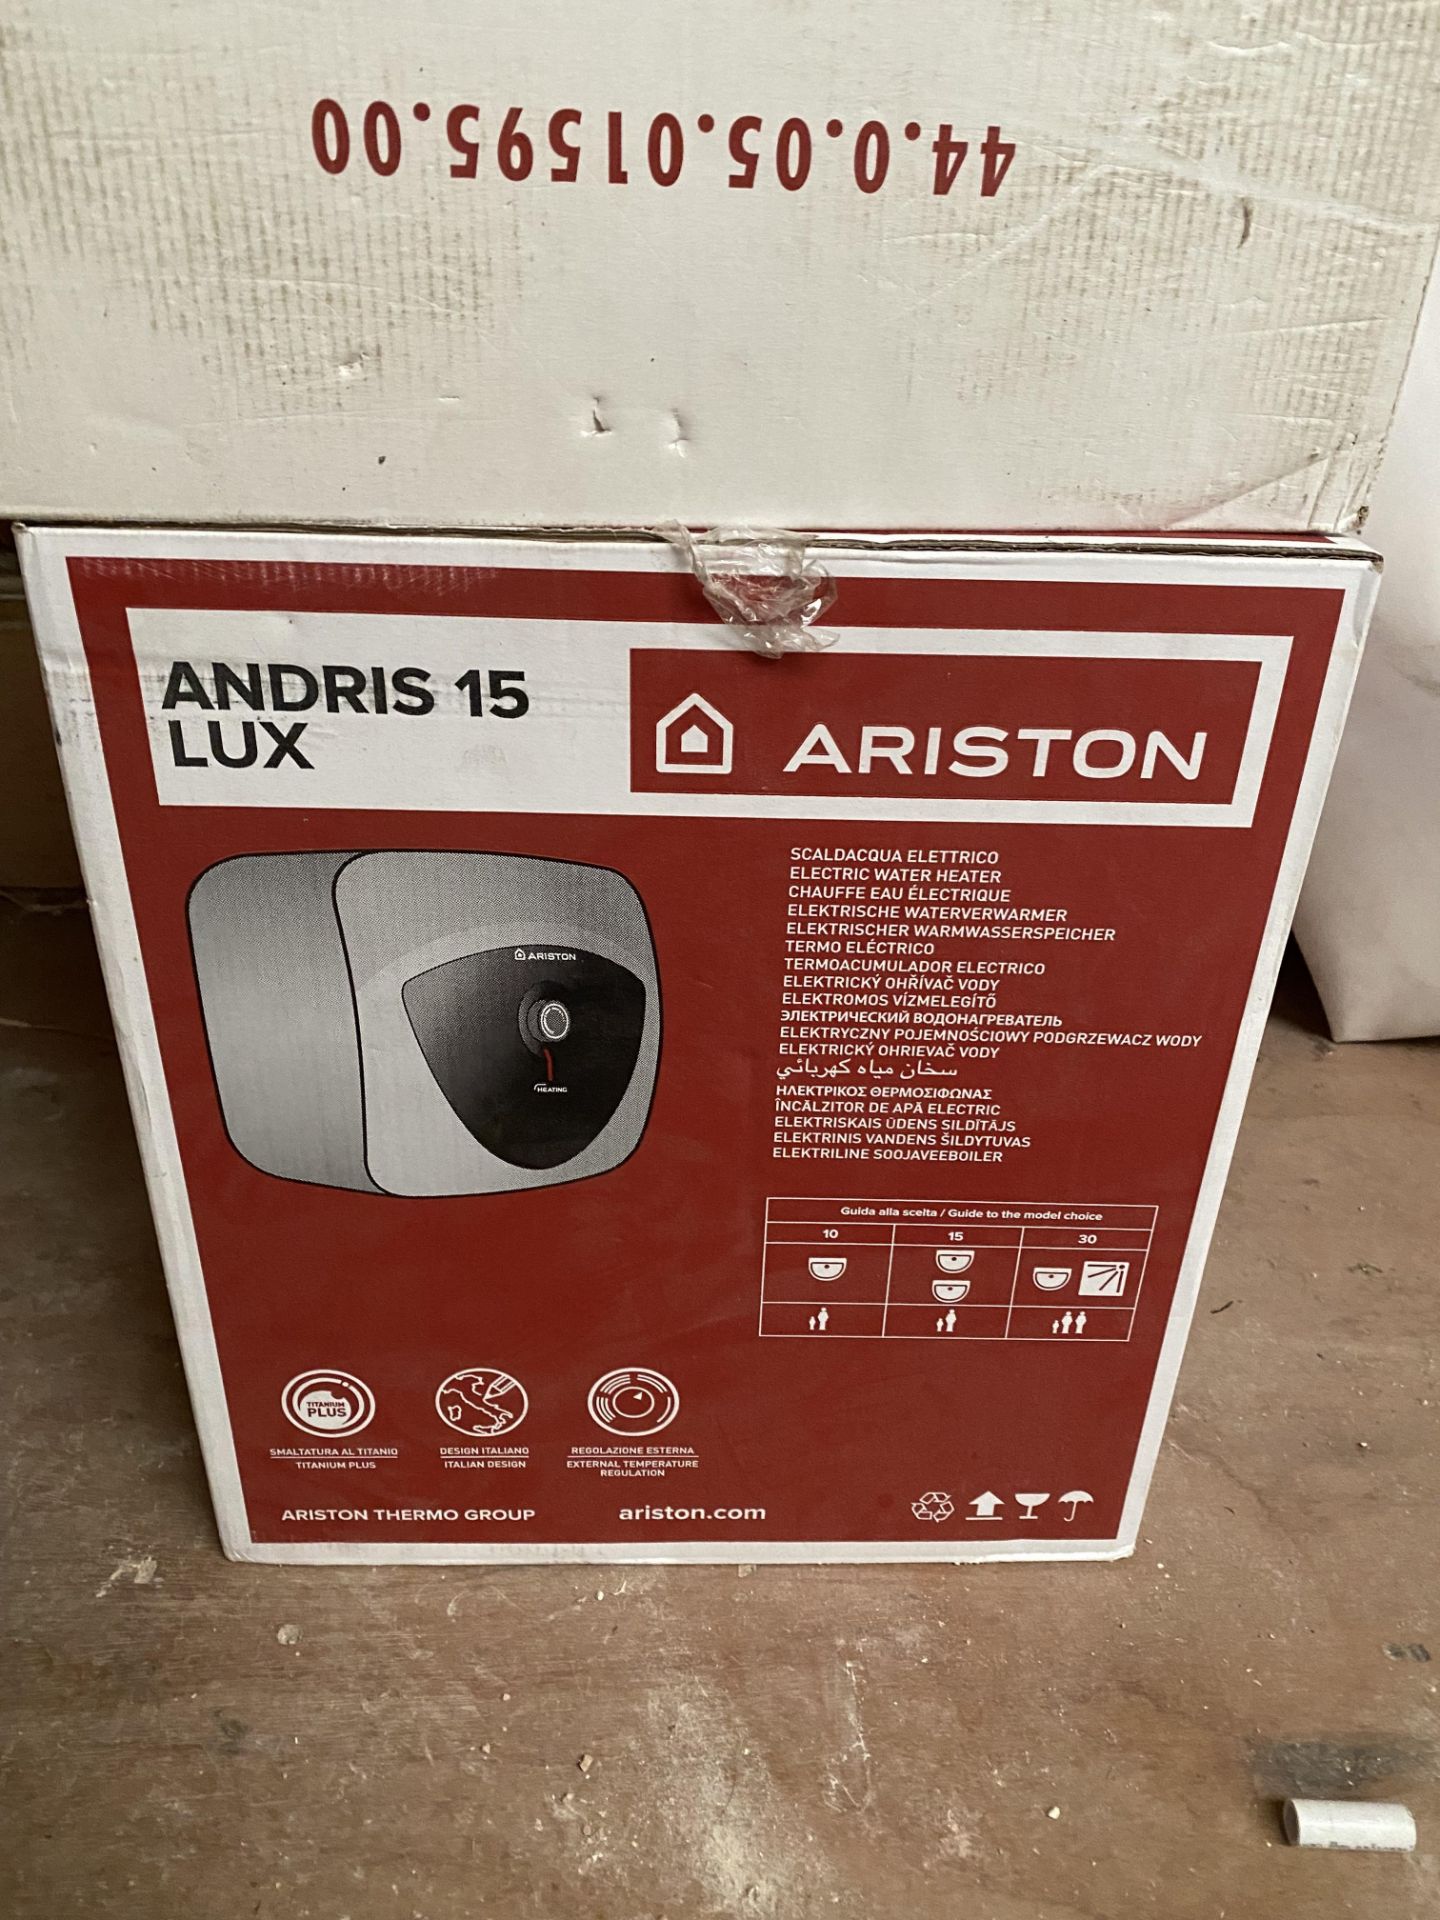 Two Ariston Andris 15 Lux electric water heaters - Image 2 of 5